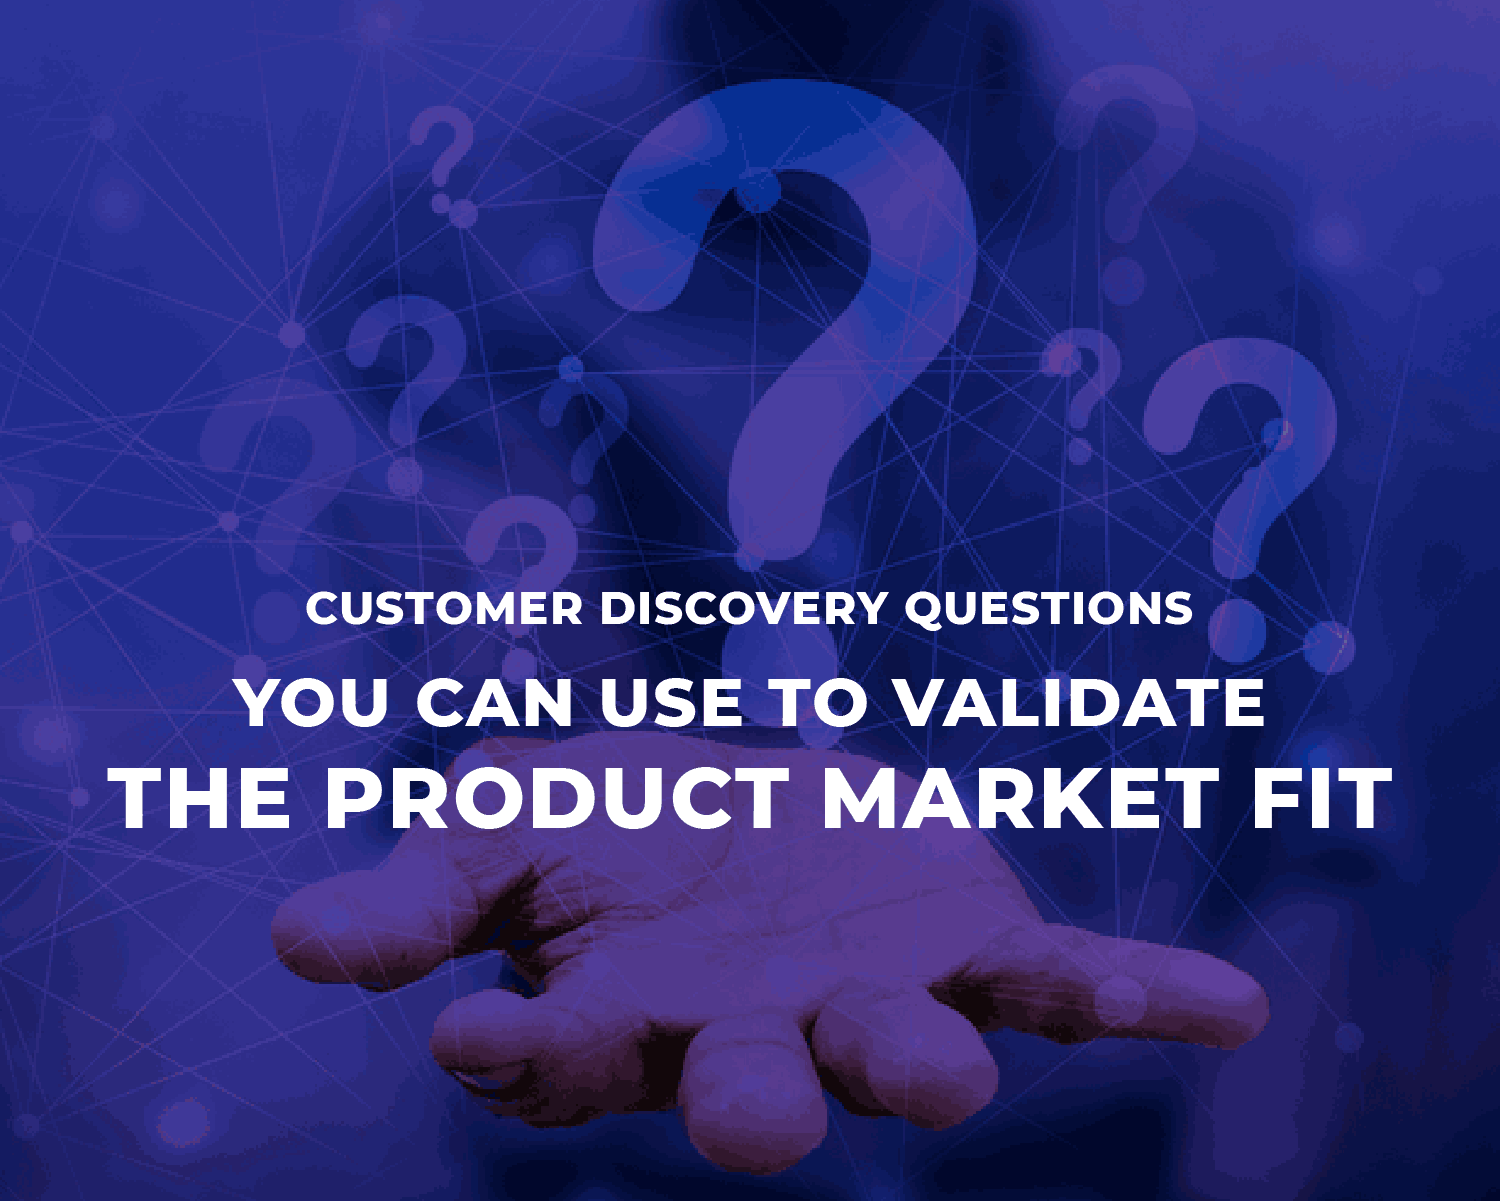 Customer Discovery Interview Questions You Can Use to Validate Product Market Fit for Your Startup